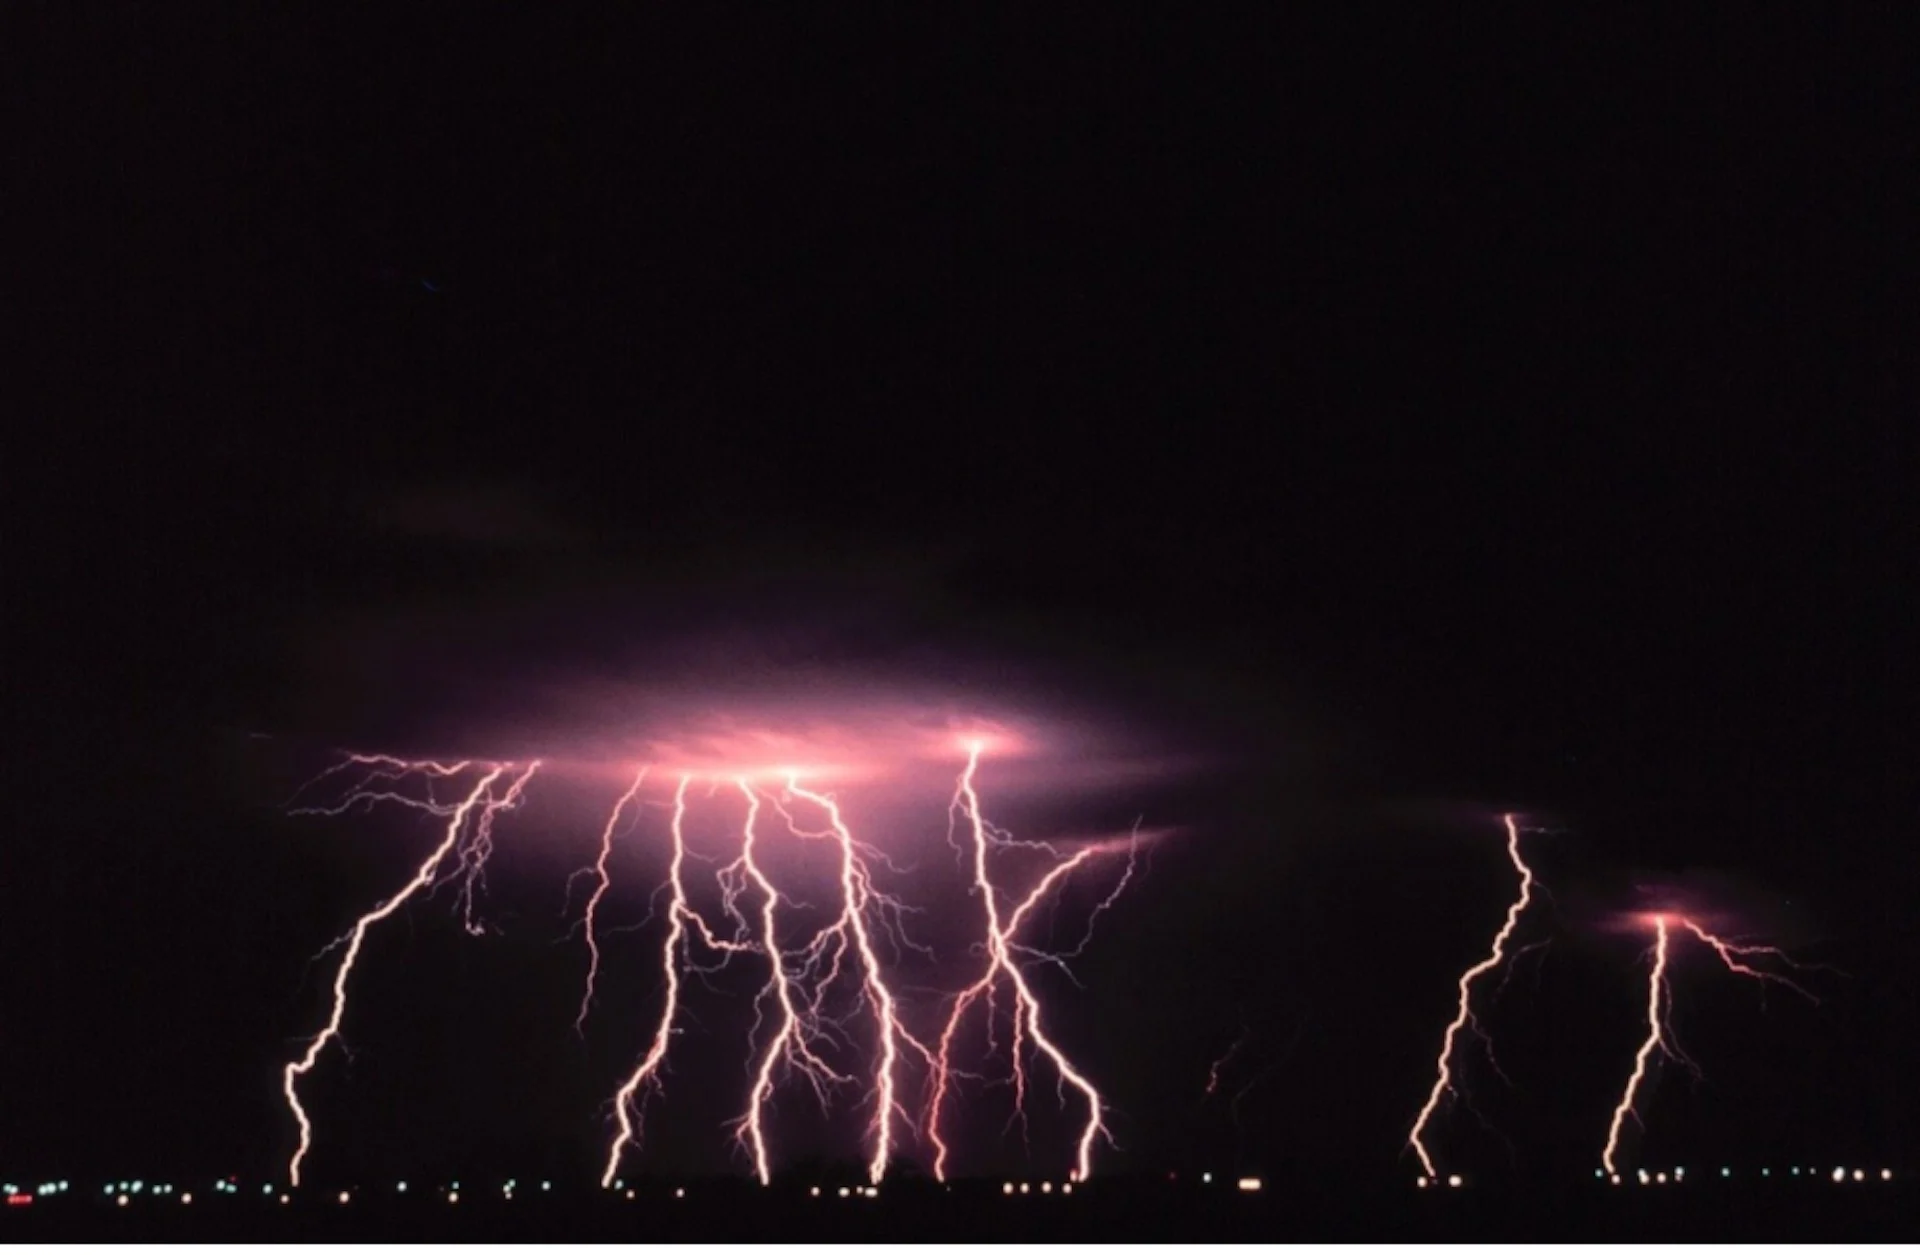 These vital ingredients make for an electrifying, dazzling thunderstorm